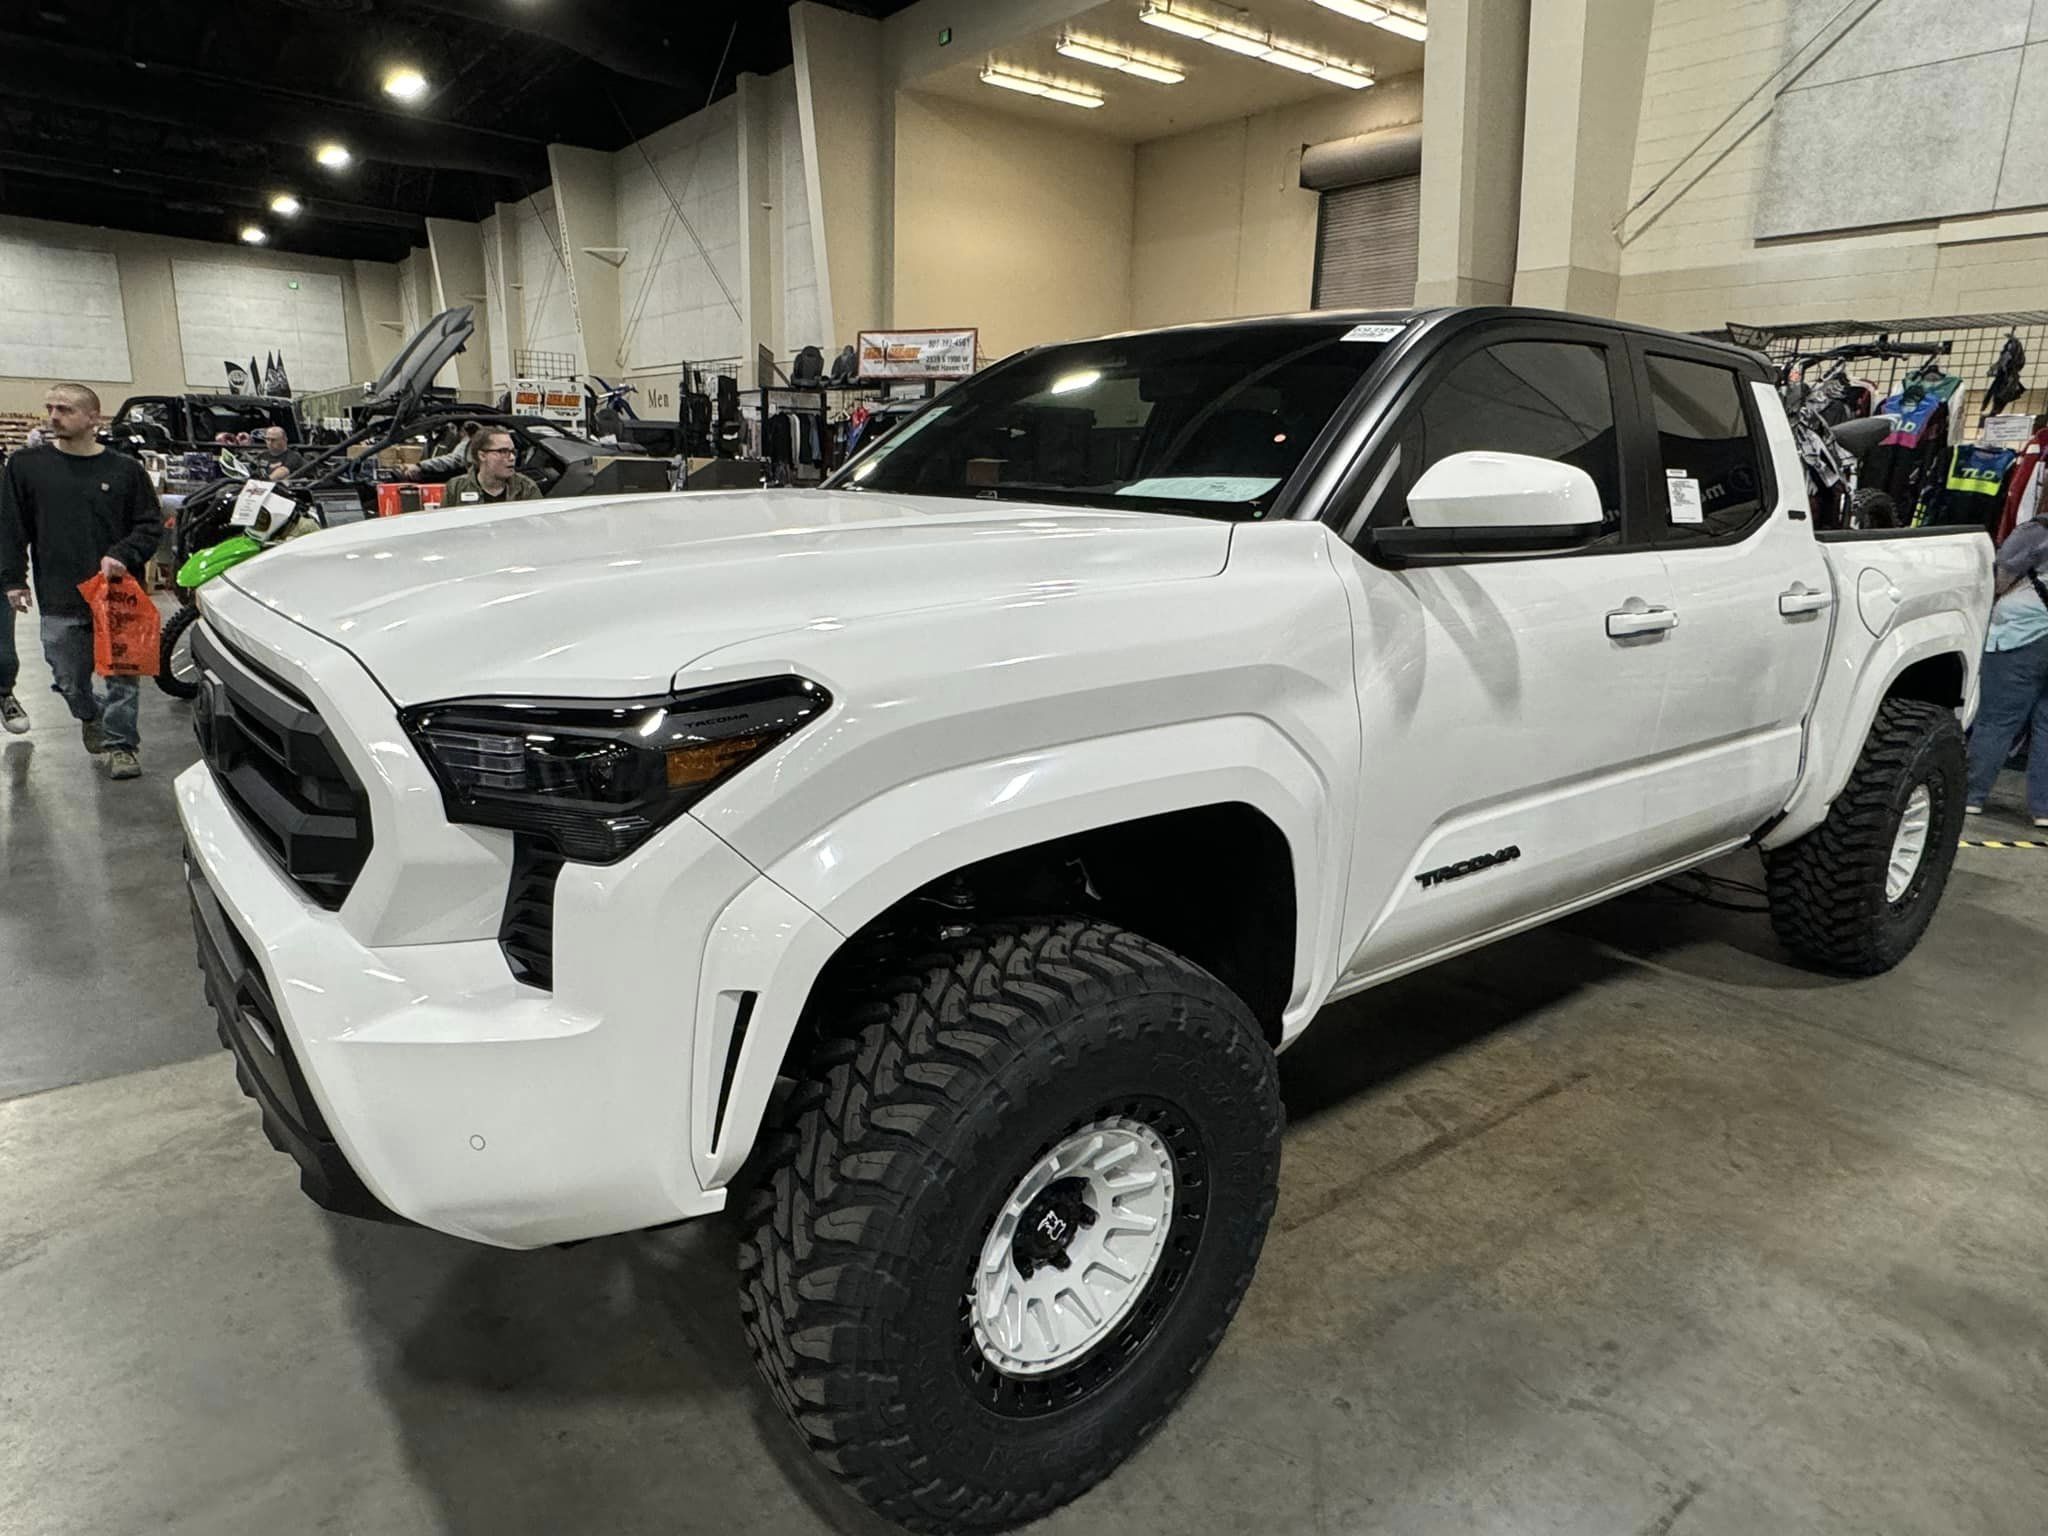 2024 Tacoma Gloss black wrap roof, fender flares and mirrors for a 2024 TRD PRO look 429591725_10220034810460723_3311467672352255517_n